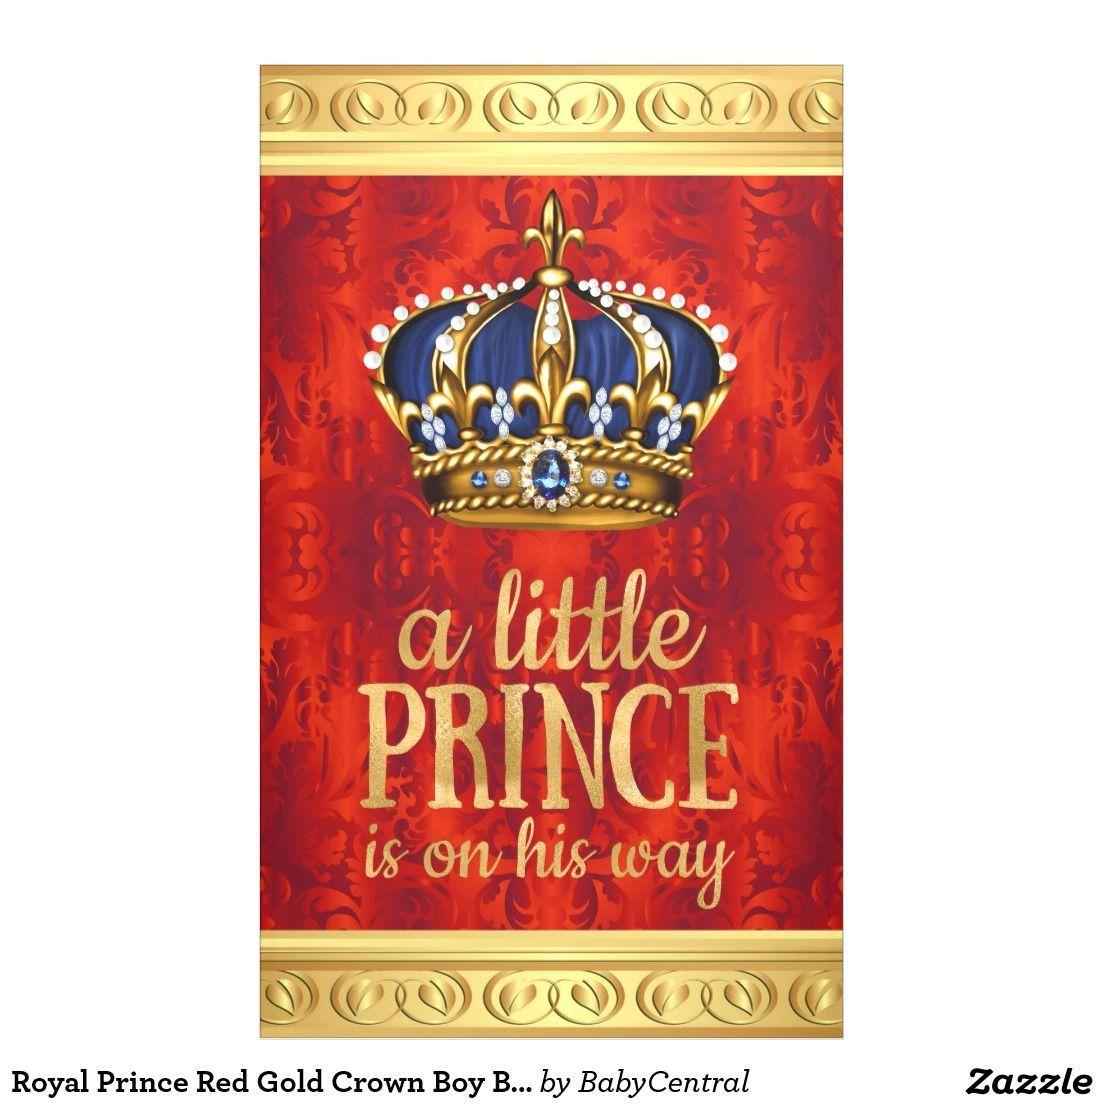 Red and Gold with a Crown of a B Logo - Royal Prince Red Gold Crown Boy Baby Shower Banner. Prince Baby